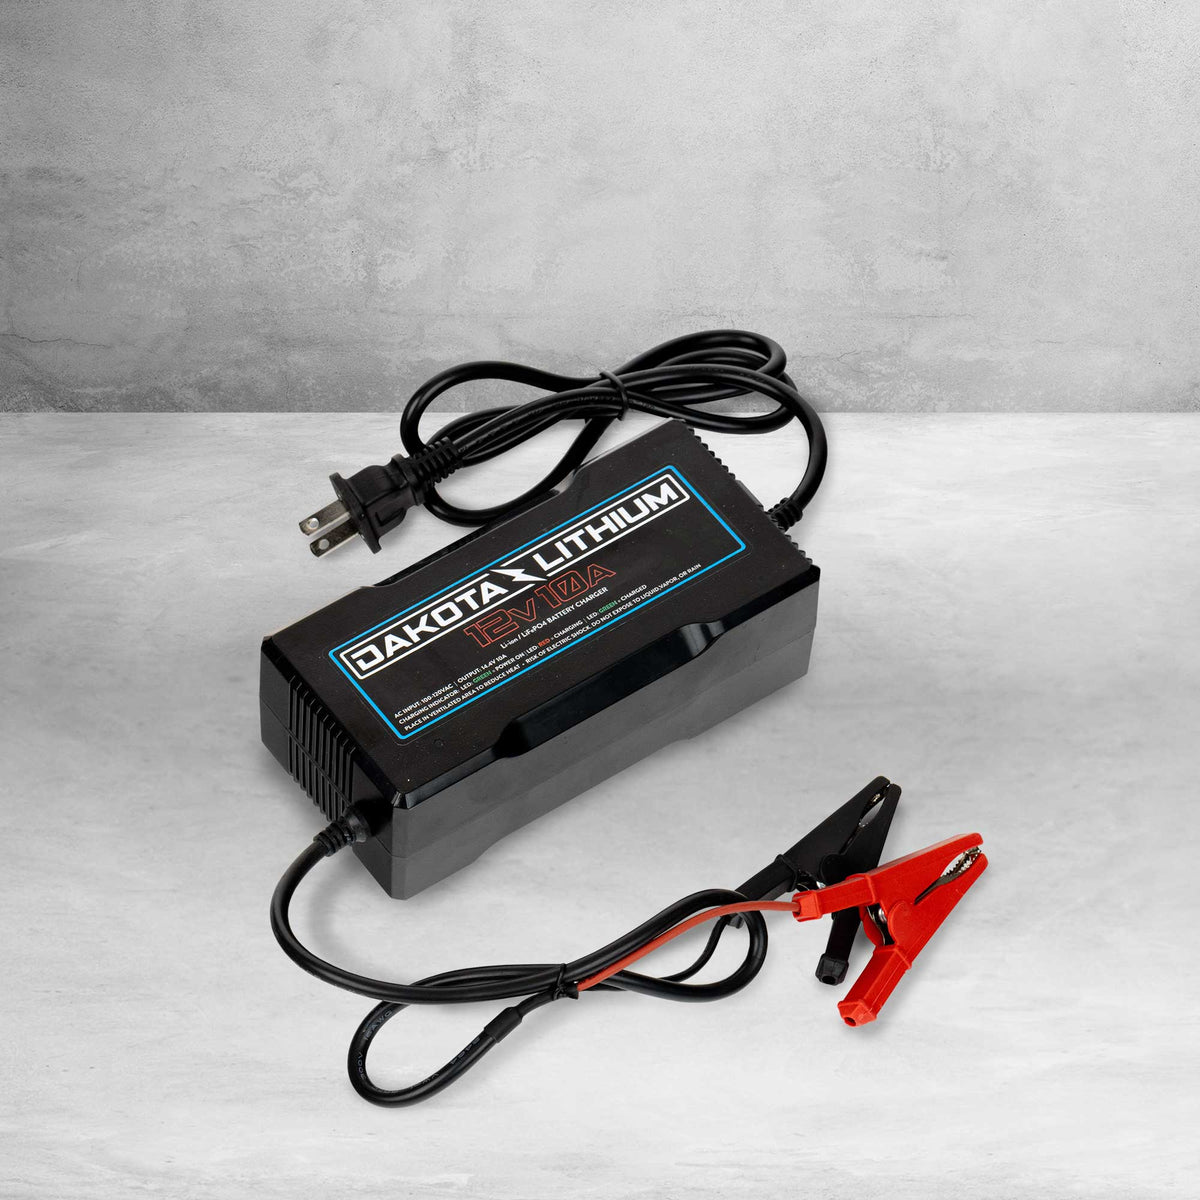 Dakota Lithium 12V 100Ah LiFePO4 Battery | Free Charger Included